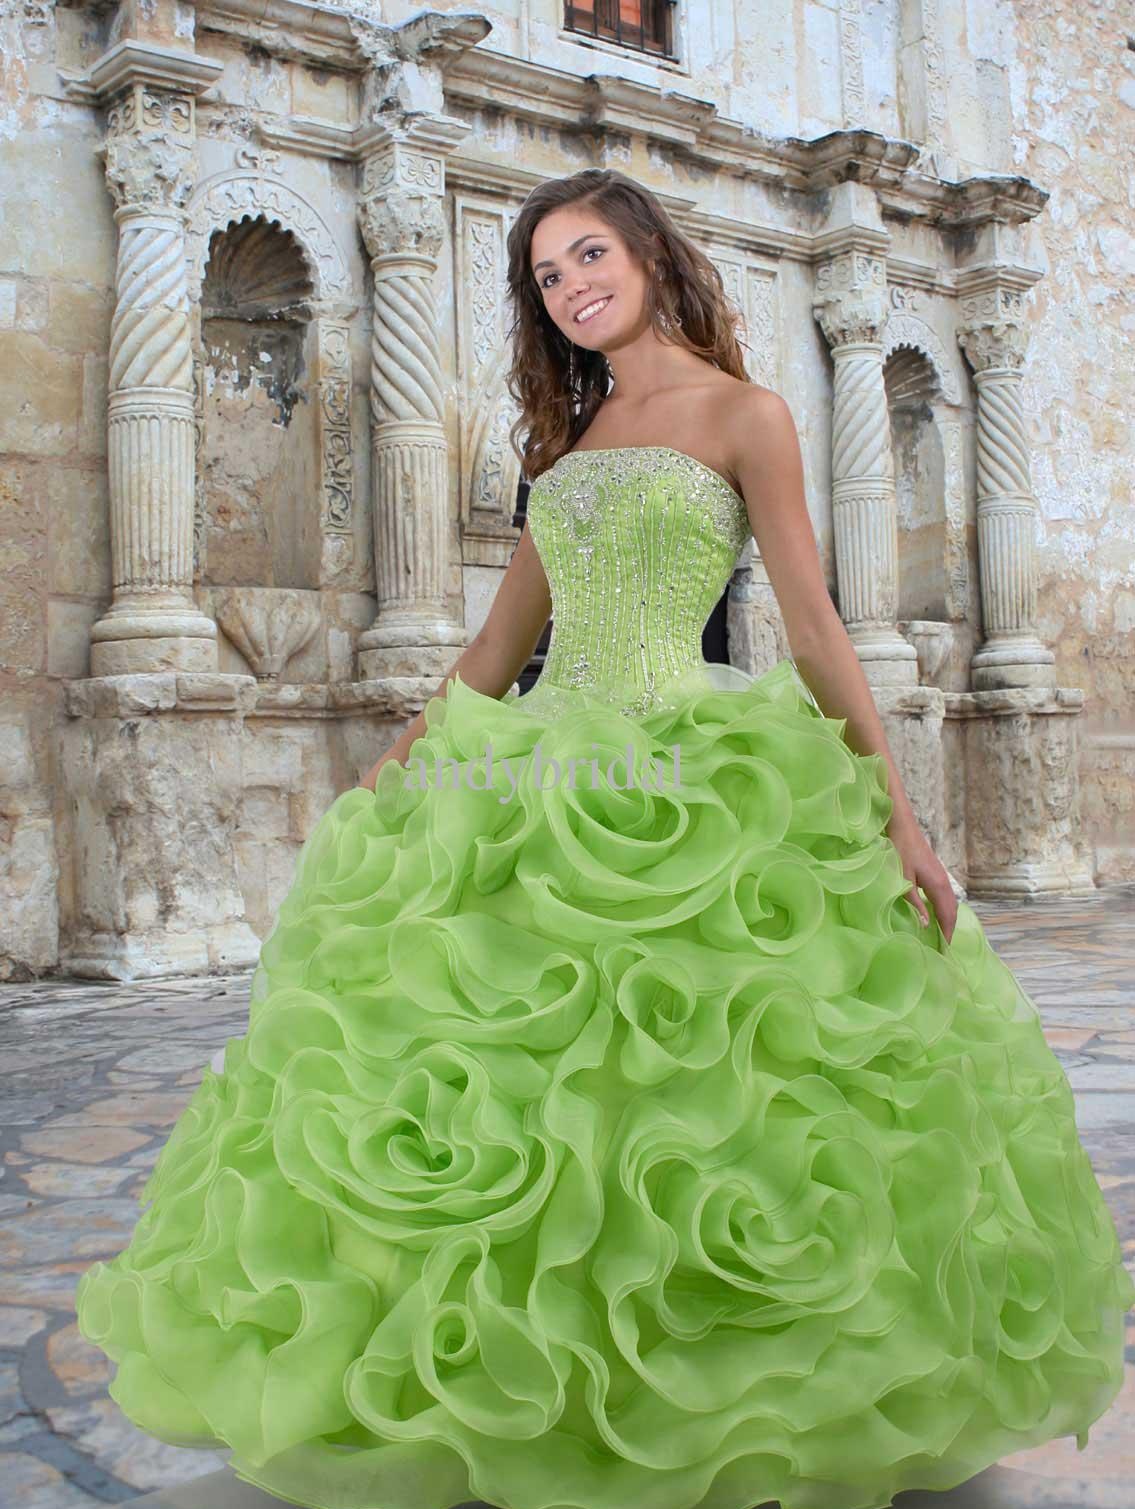 Green Quinceanera Dresses | Dressed Up Girl